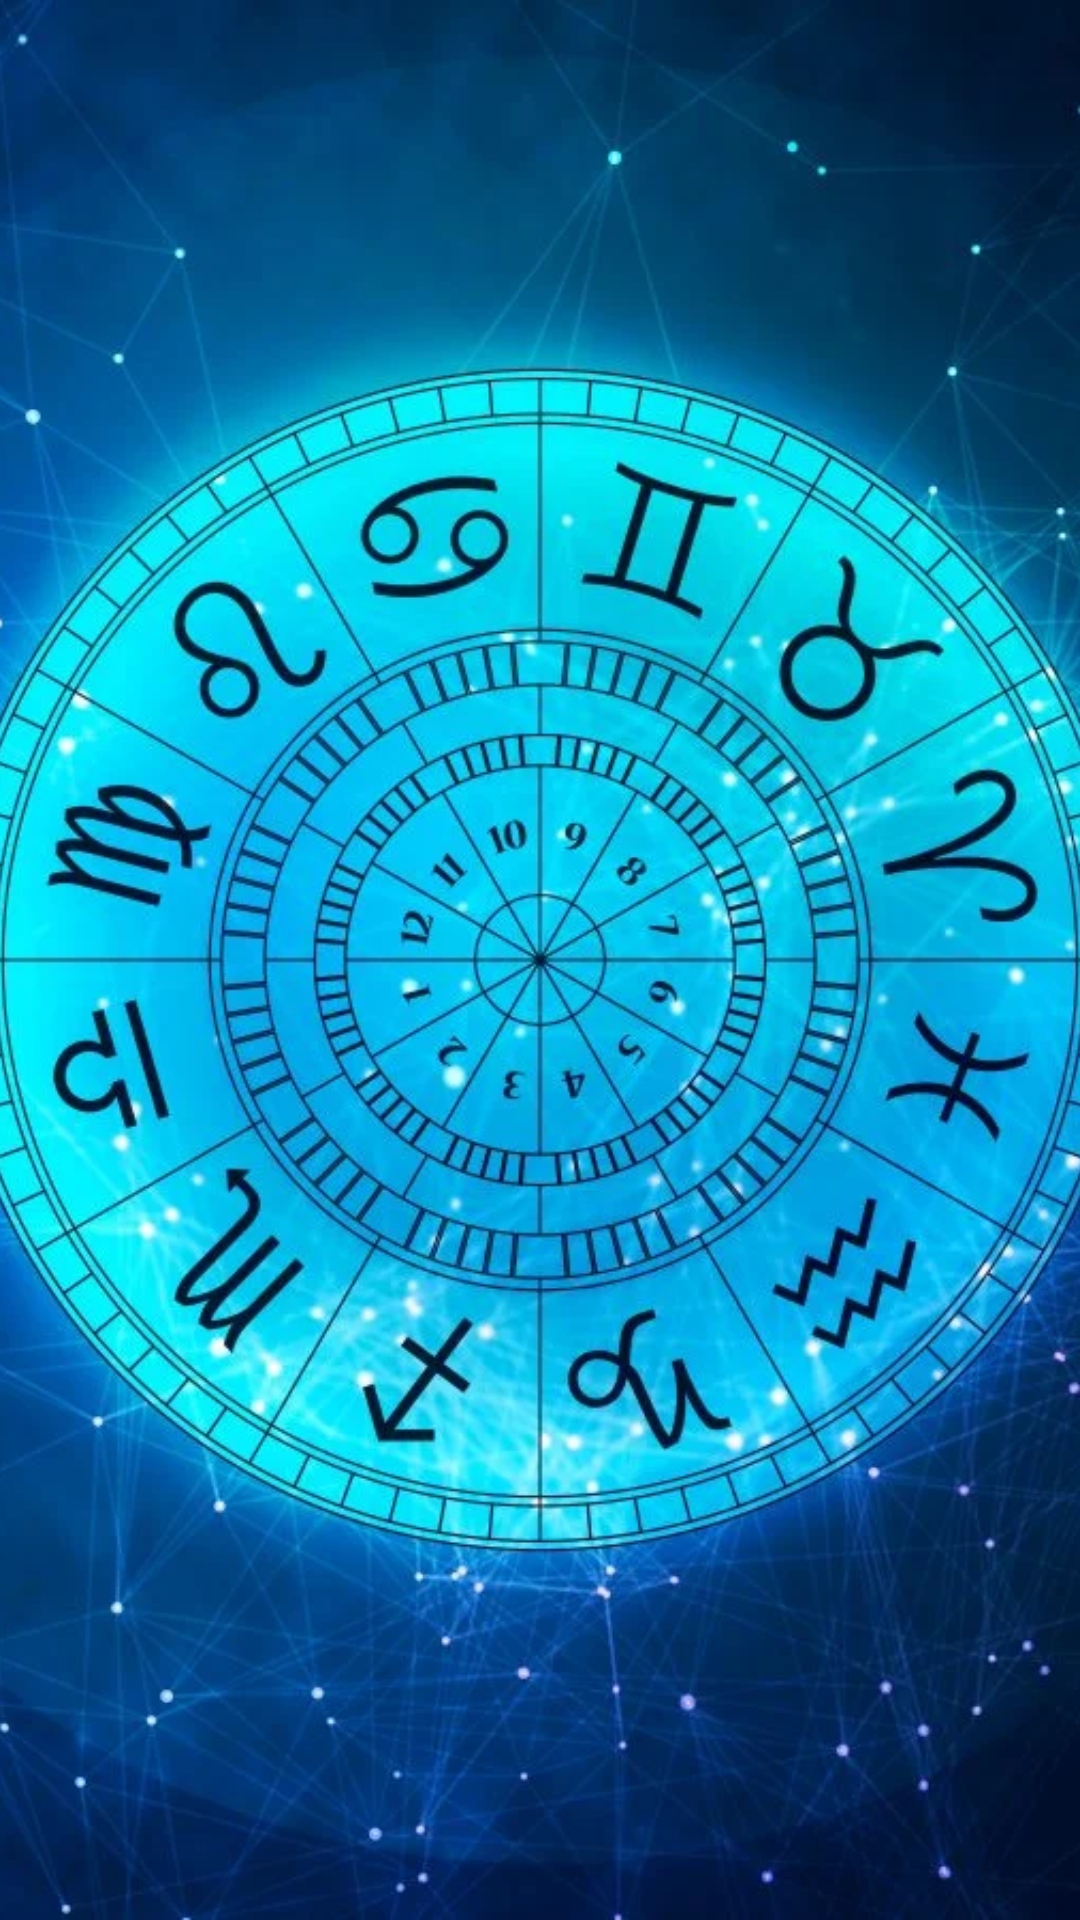 Know lucky colour and number for all zodiac signs in your horoscope for